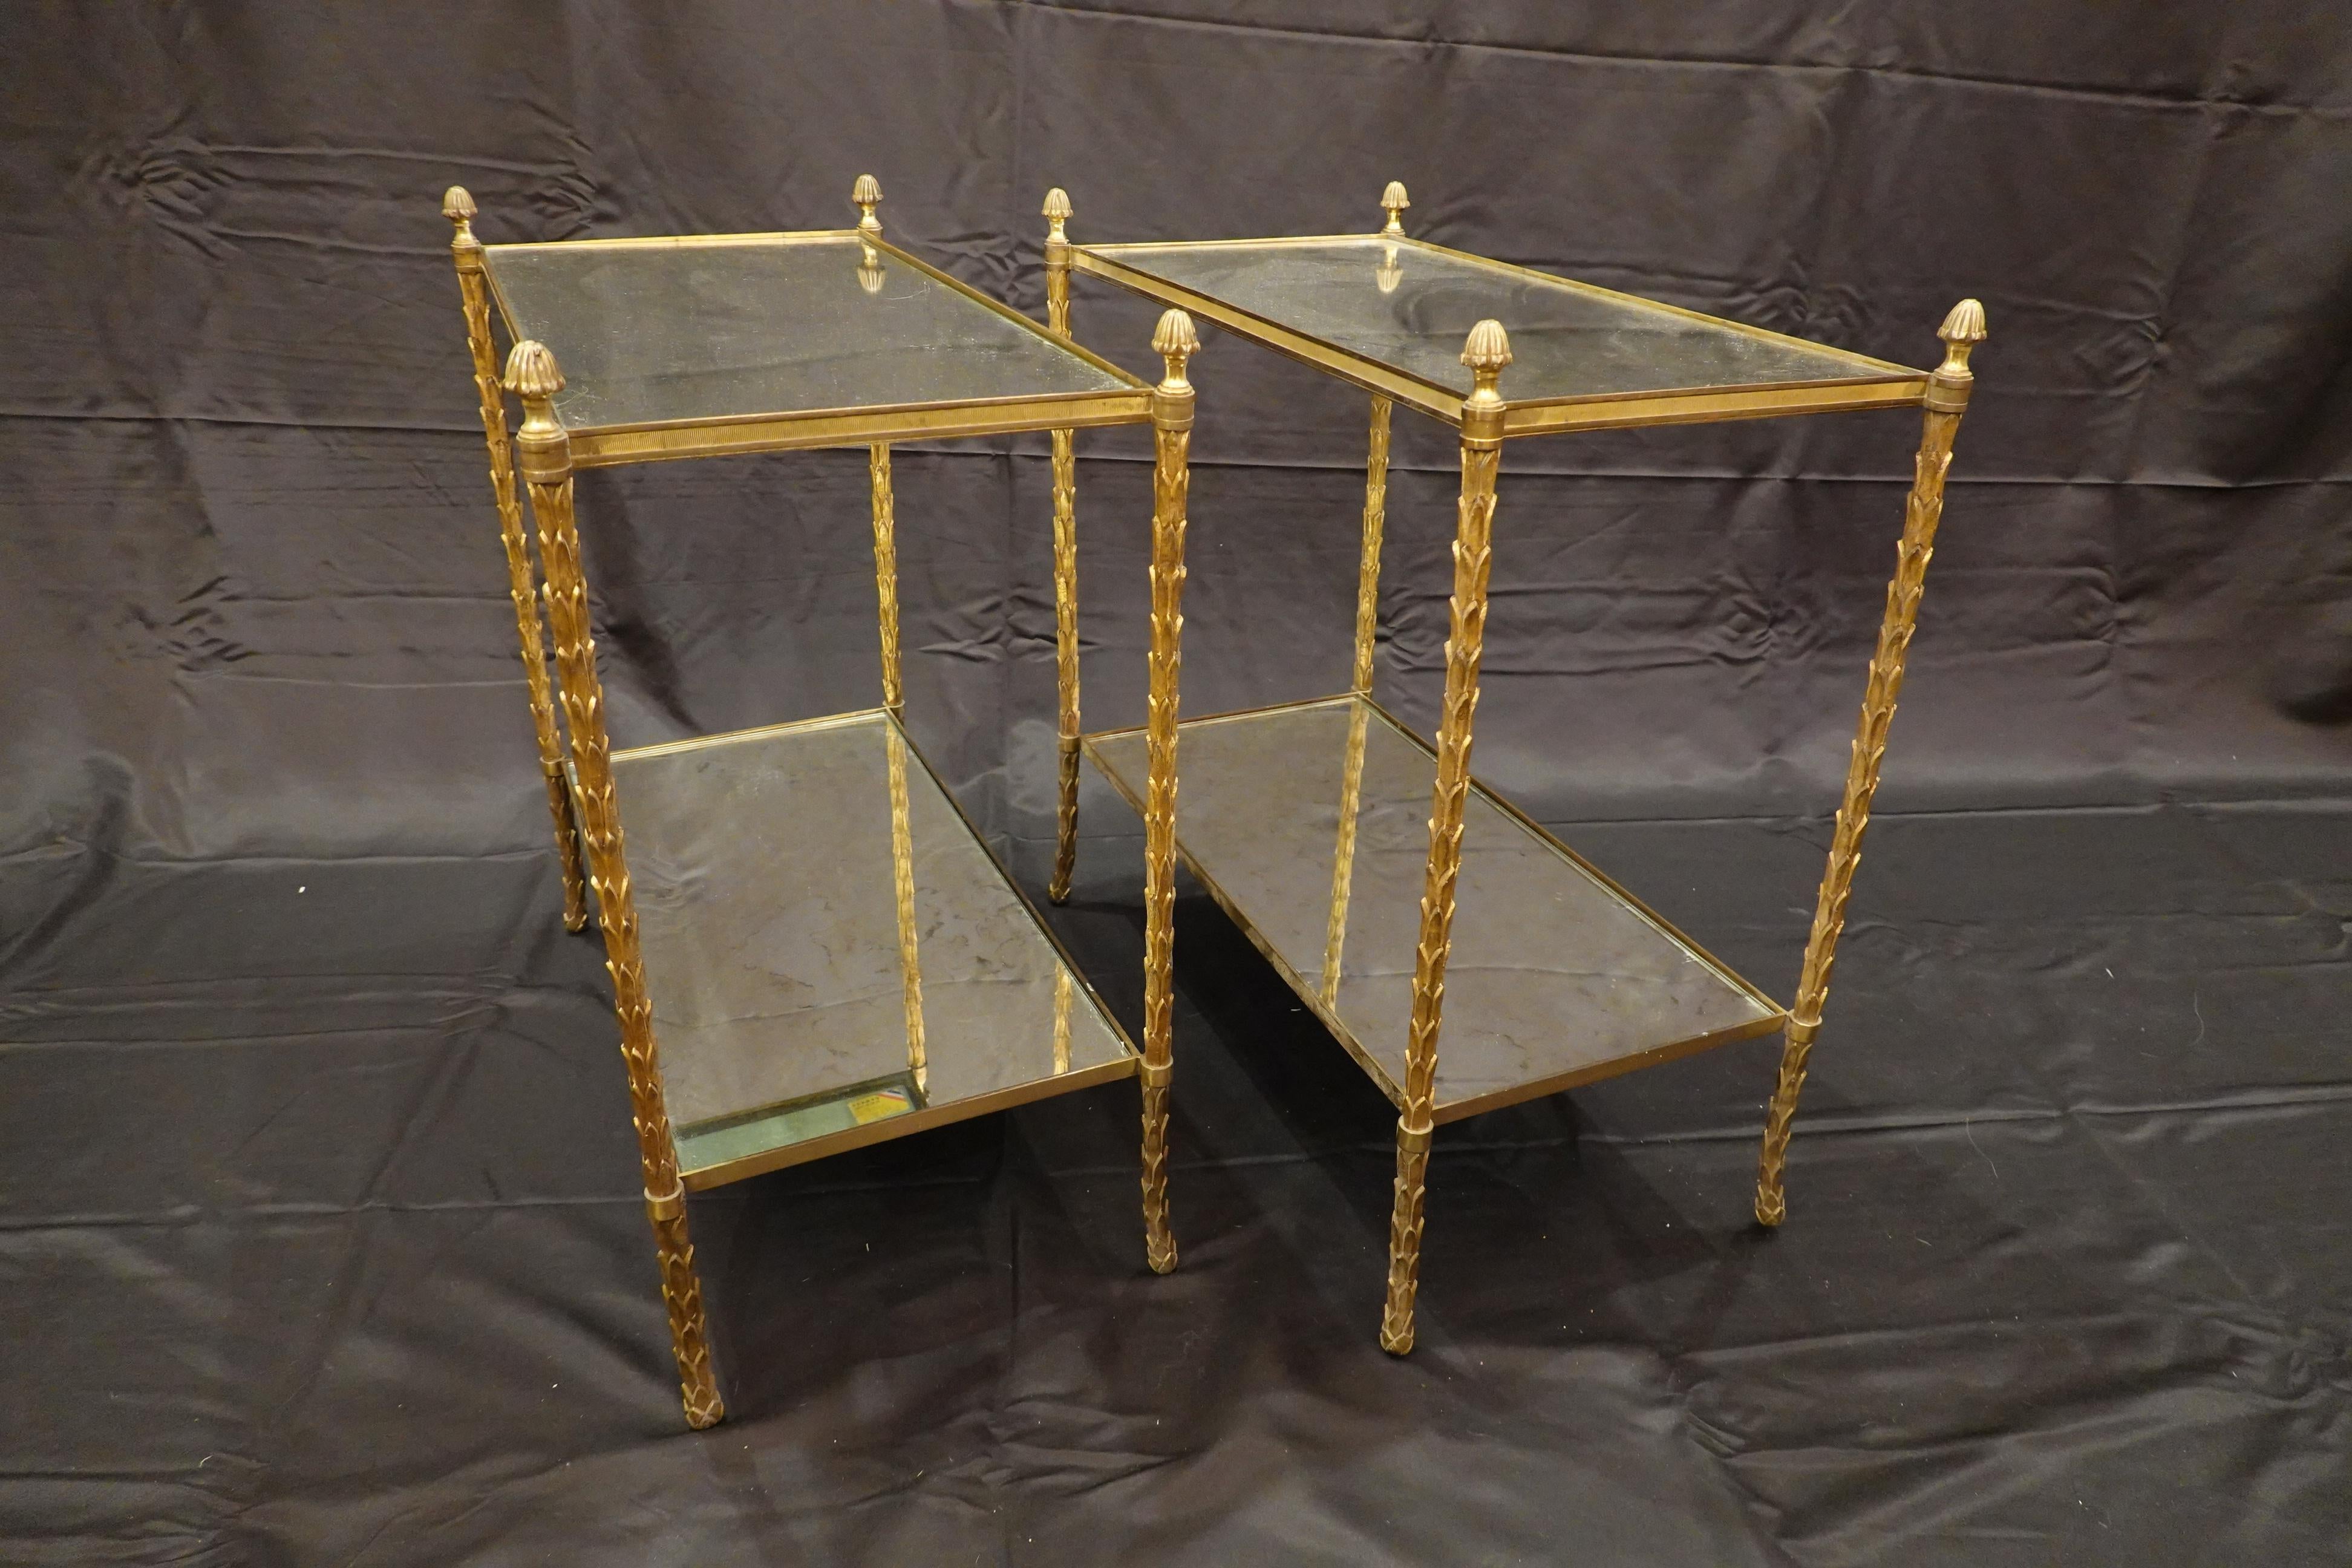 Pair of elegant gilt-bronze two-tiered side tables by French Manufacturer Maison Bagues (circa 1940s-1950s). The legs are in the form of palm fronds terminating in pine cone finials. The eglomise glass tops are slightly smokey with light gold and